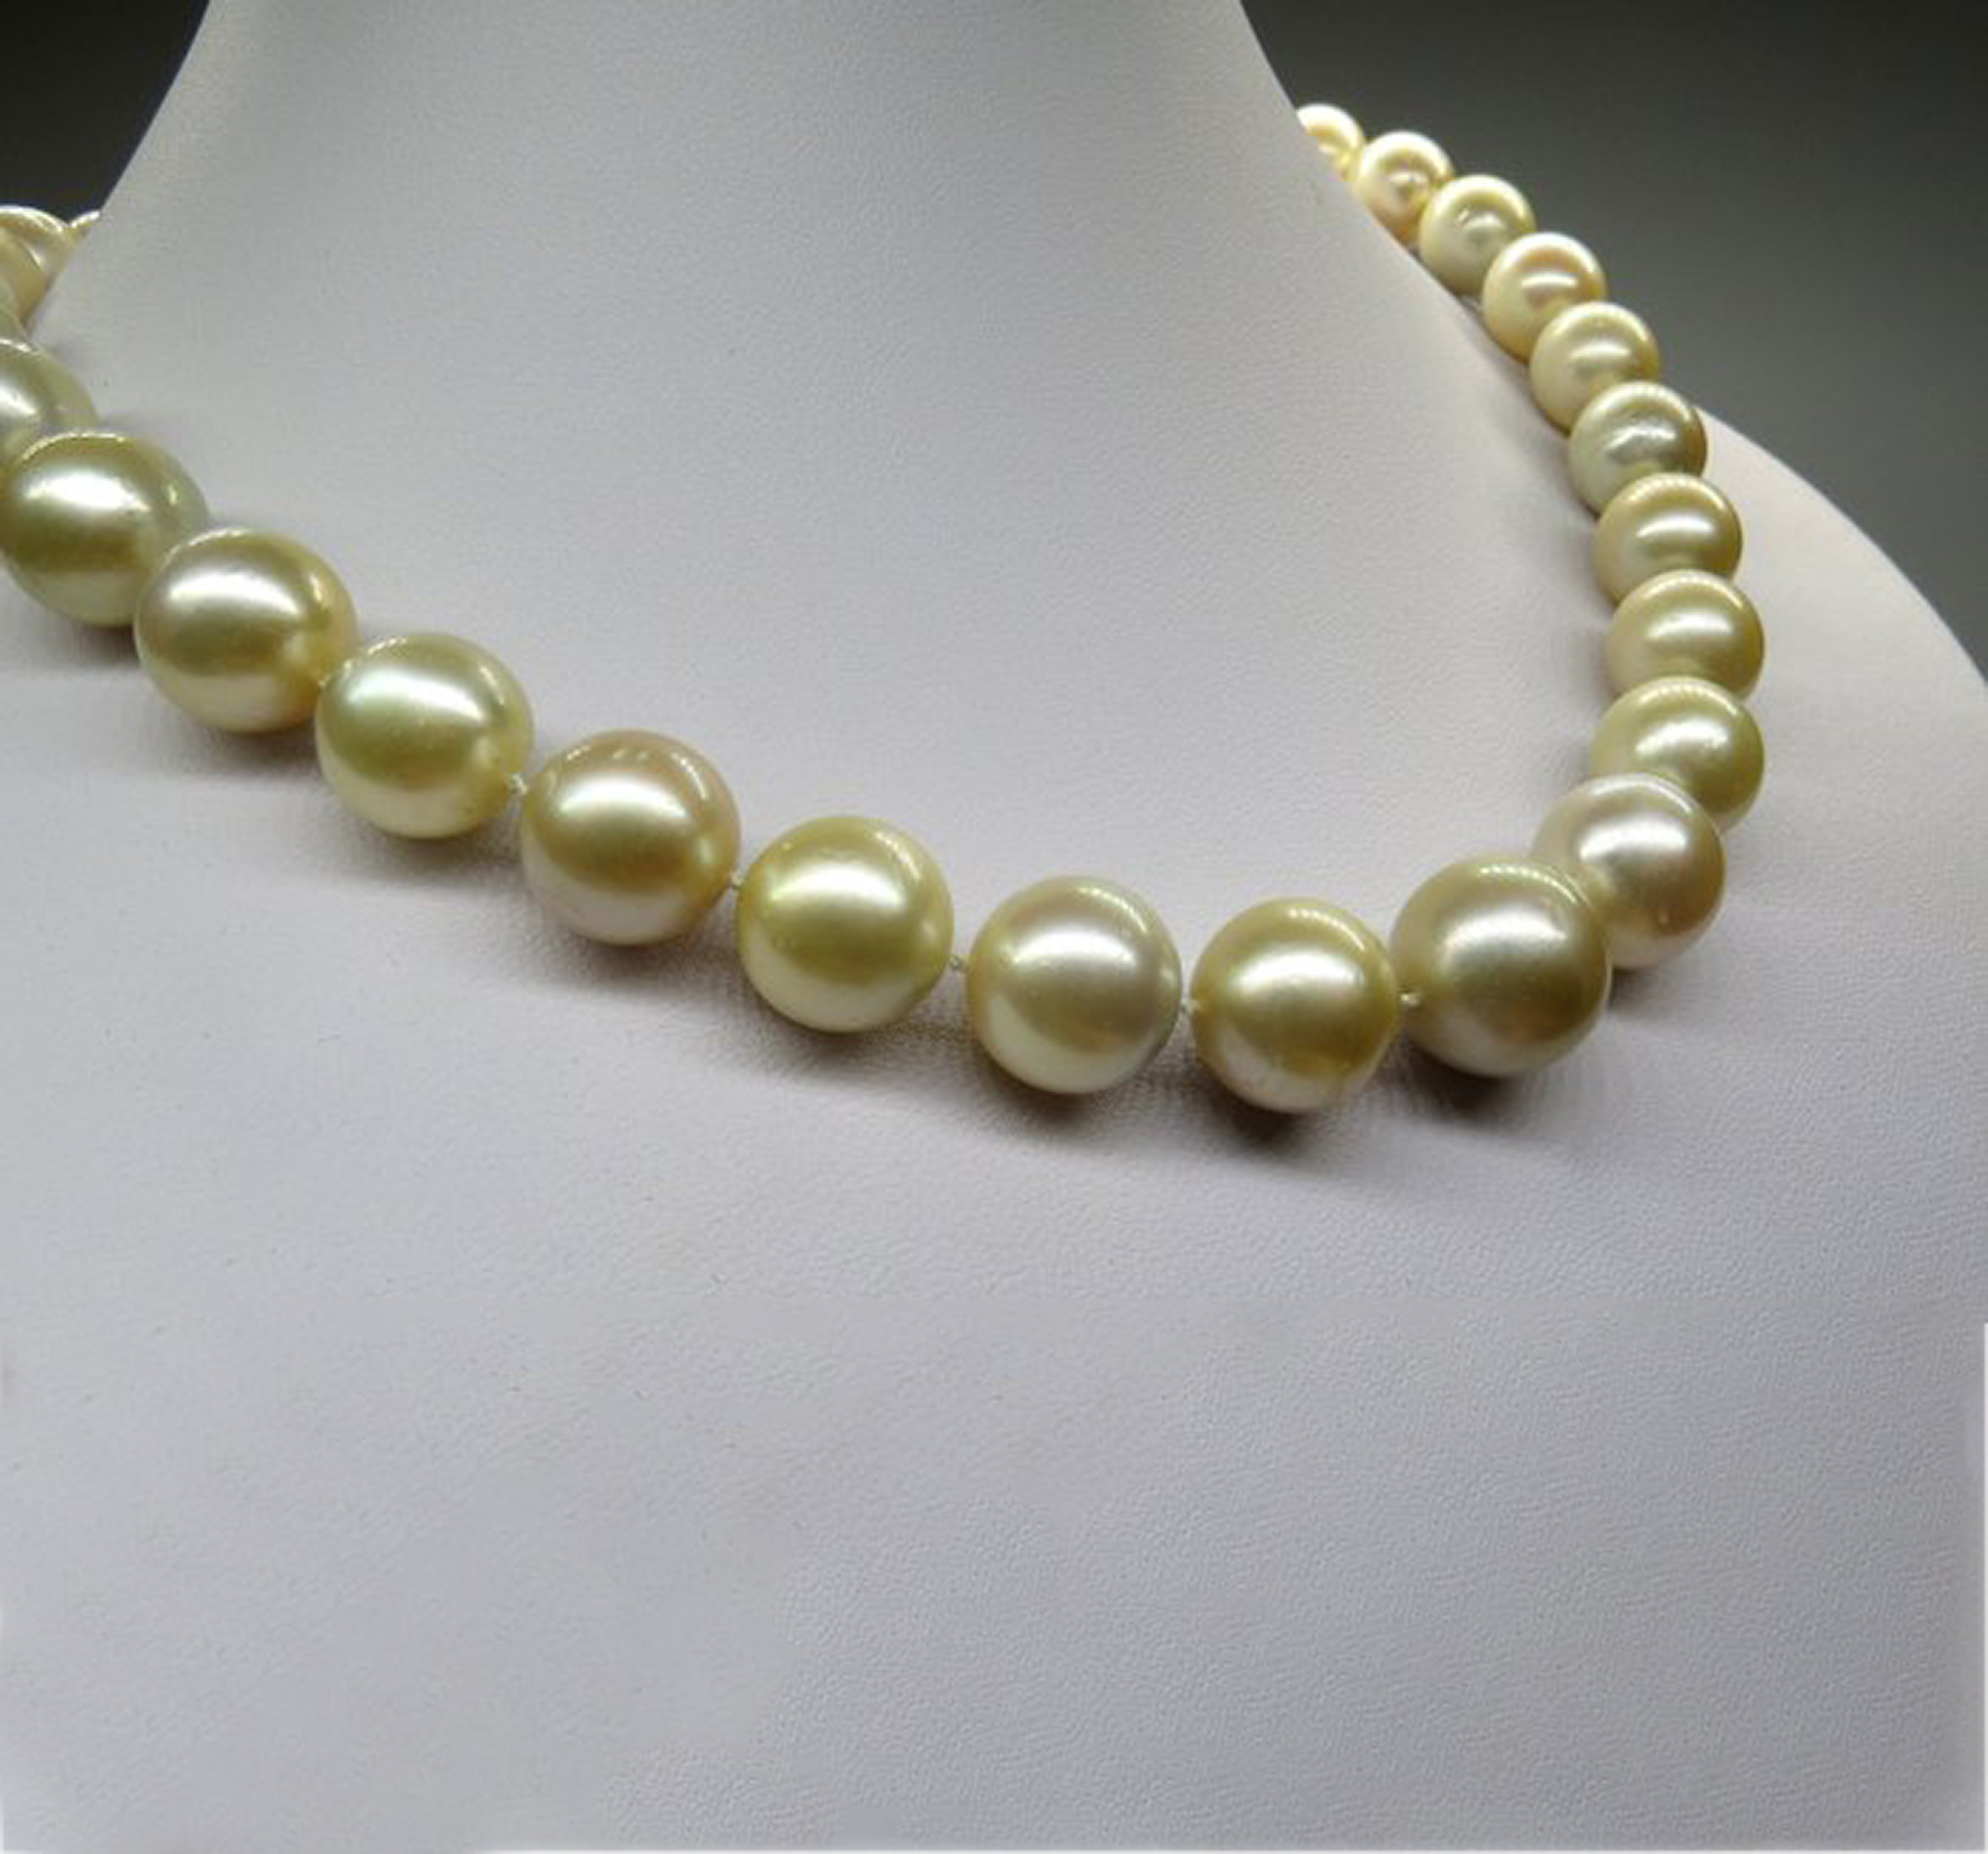 Necklace in Cream and Gold Toned Australian Pearl Necklace with 14k Yellow Gold Gallon Ball Clasp